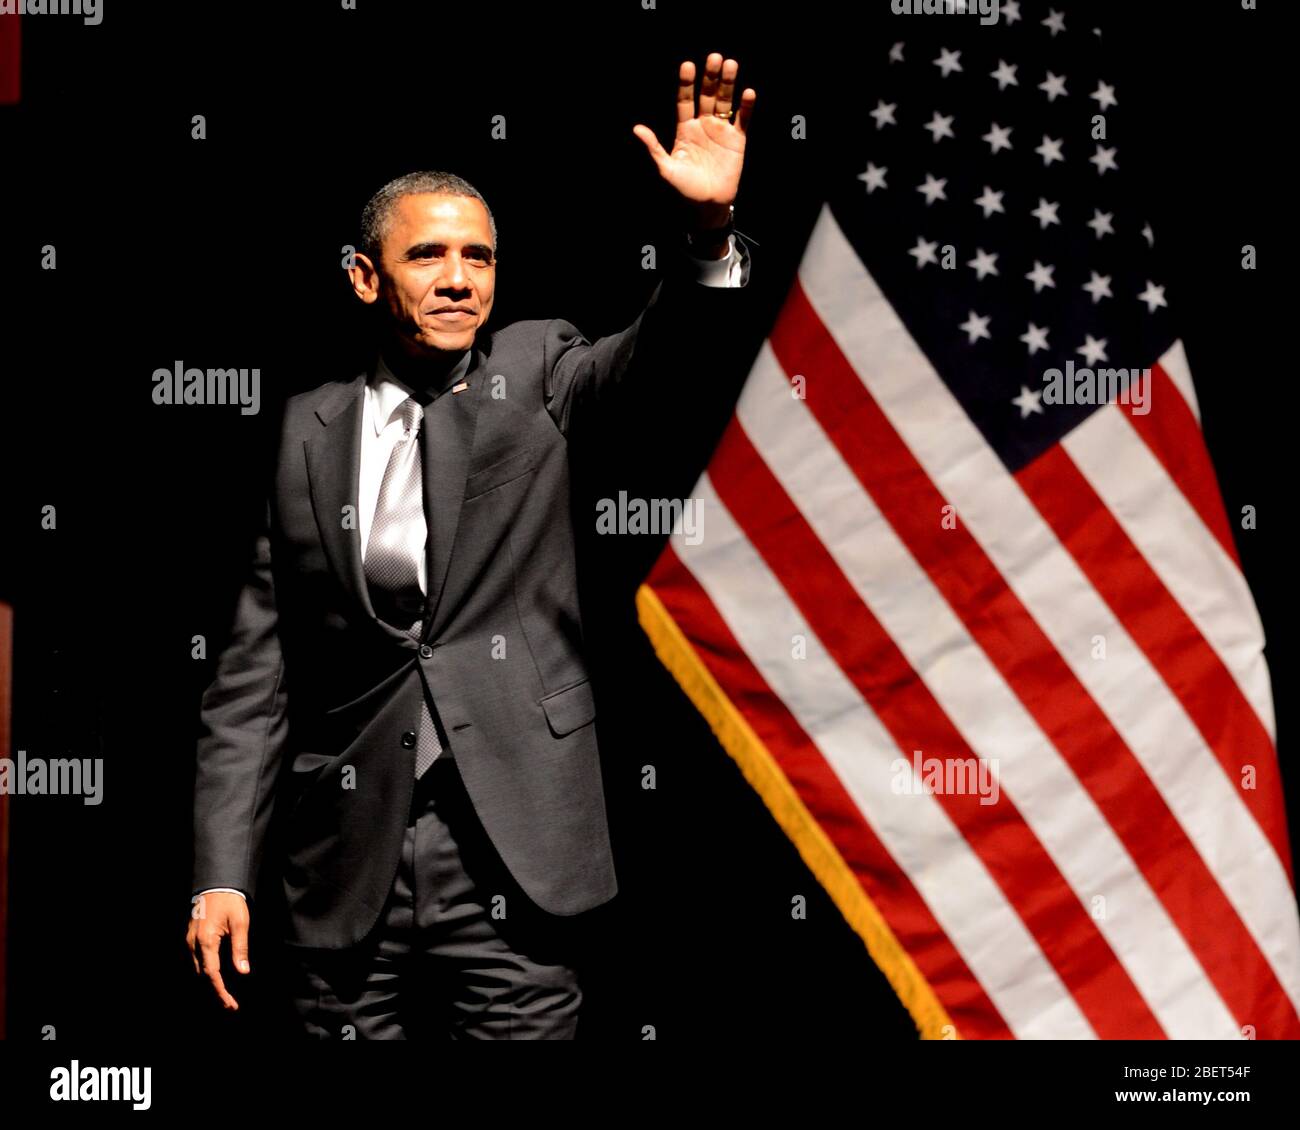 MIAMI BEACH, FL - JUNE 26: US President Barack Obama speaks during a fundraiser hosted by Marc Anthony at the Fillmore Miami Beach on June 16, 2012 in Stock Photo